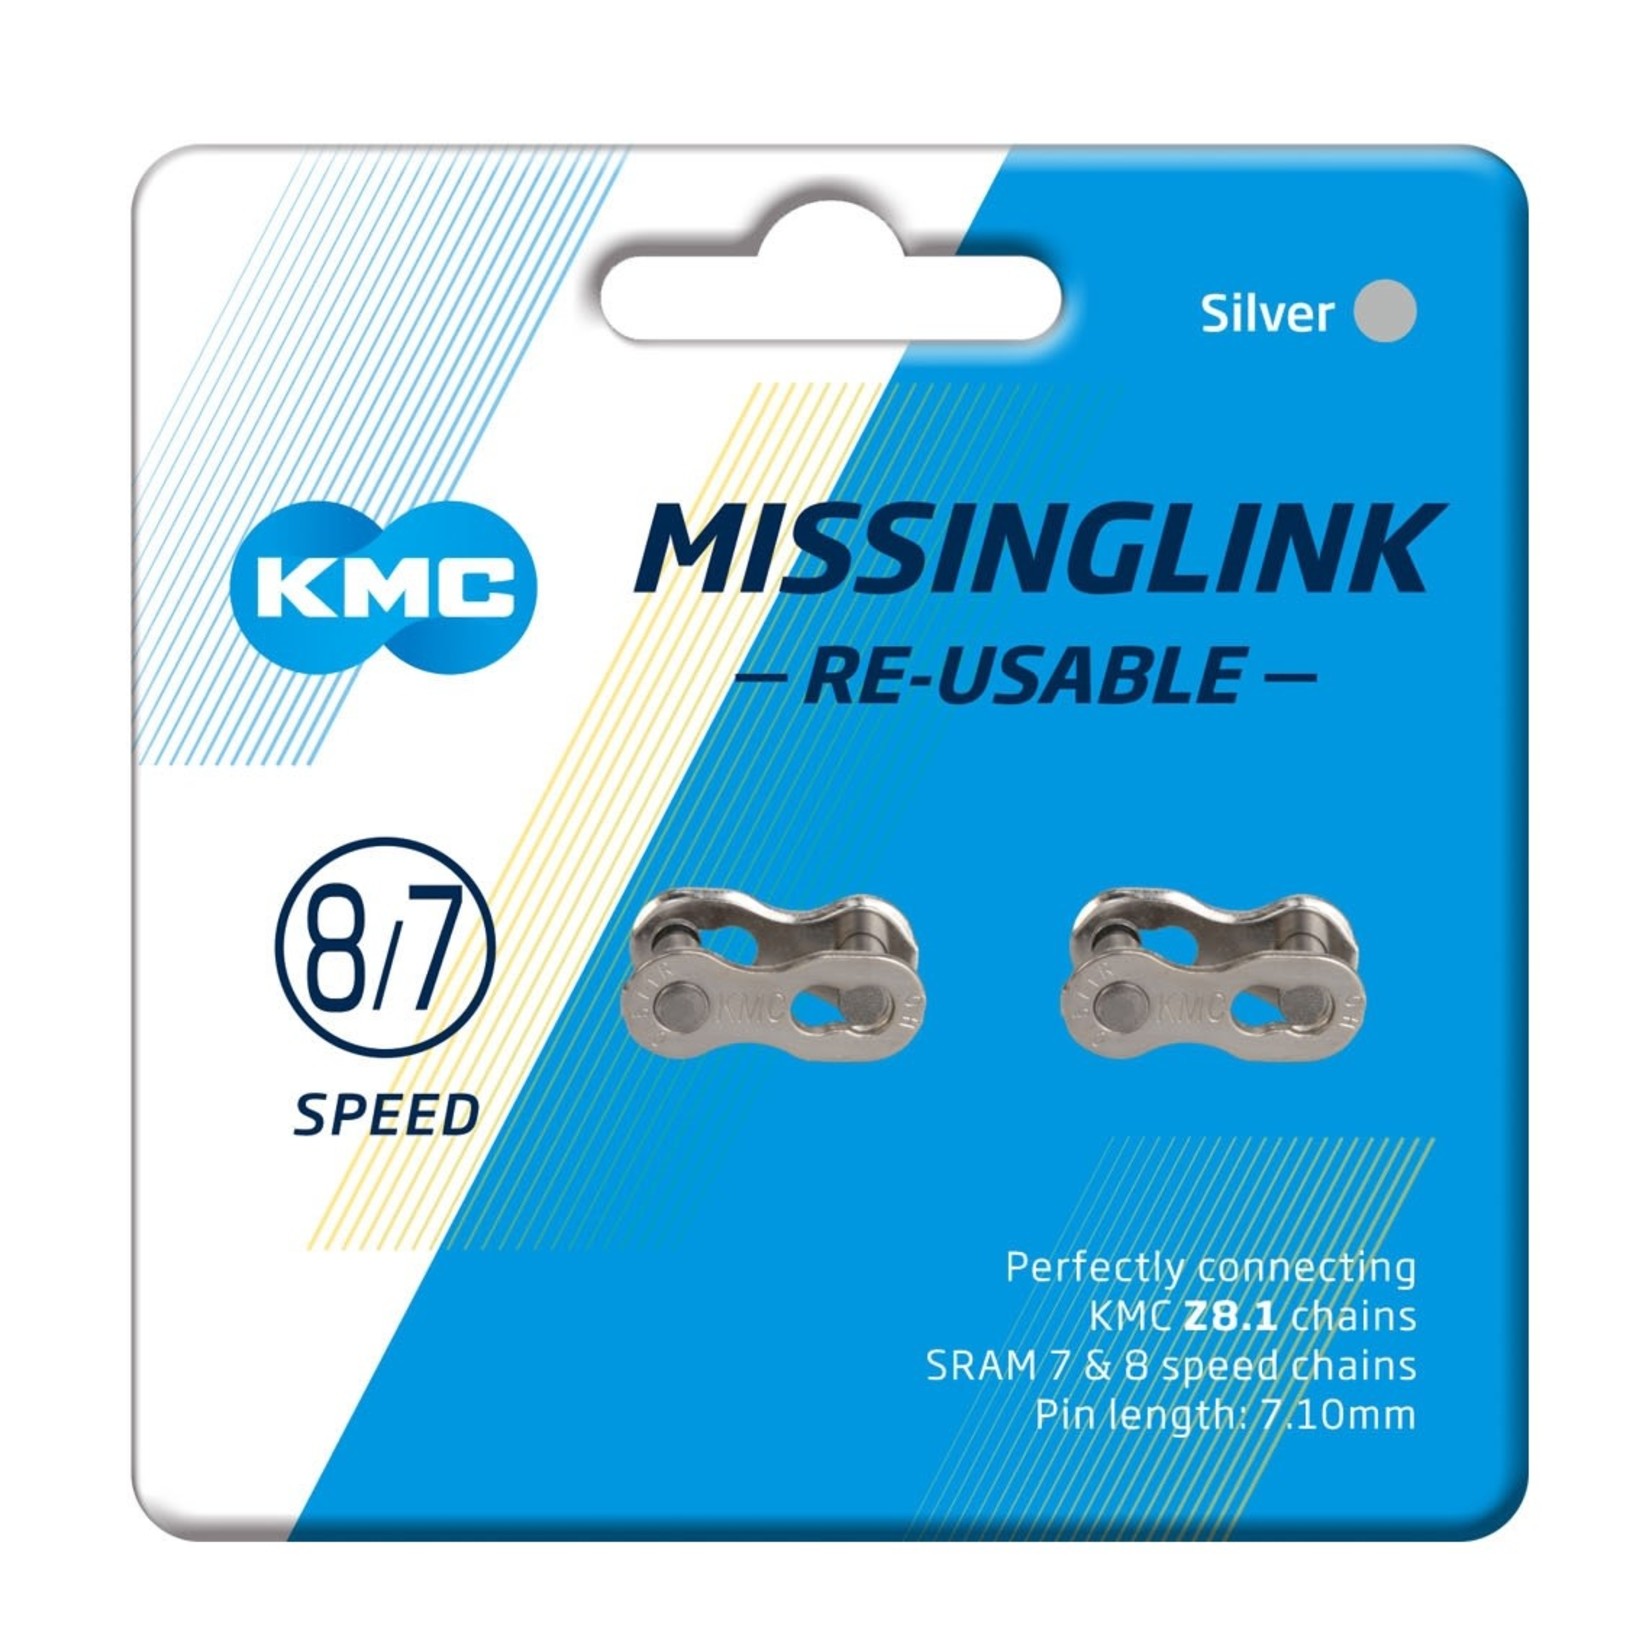 KMC KMC CL571R Missing Link 6/7/8 Speed, Pair, Silver